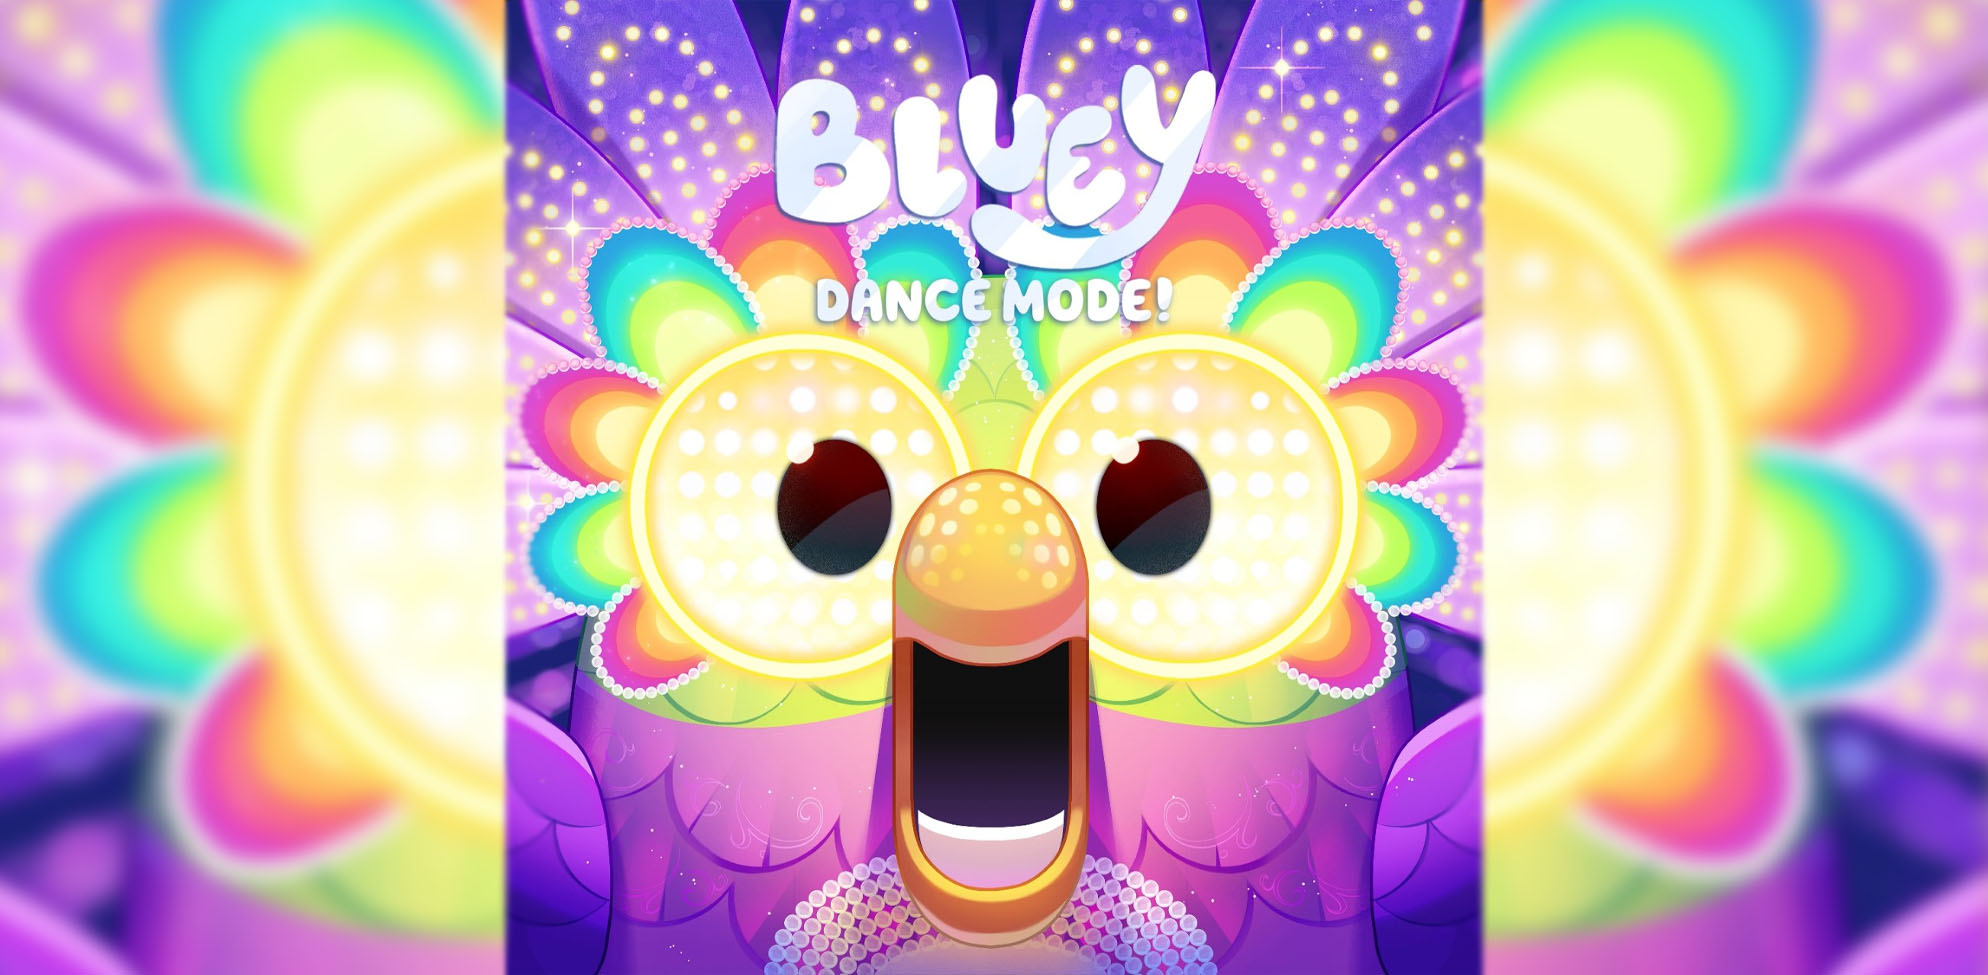 New Album Bluey: Dance Mode! From Multi Award-Winning Global TV Hit Out Today image